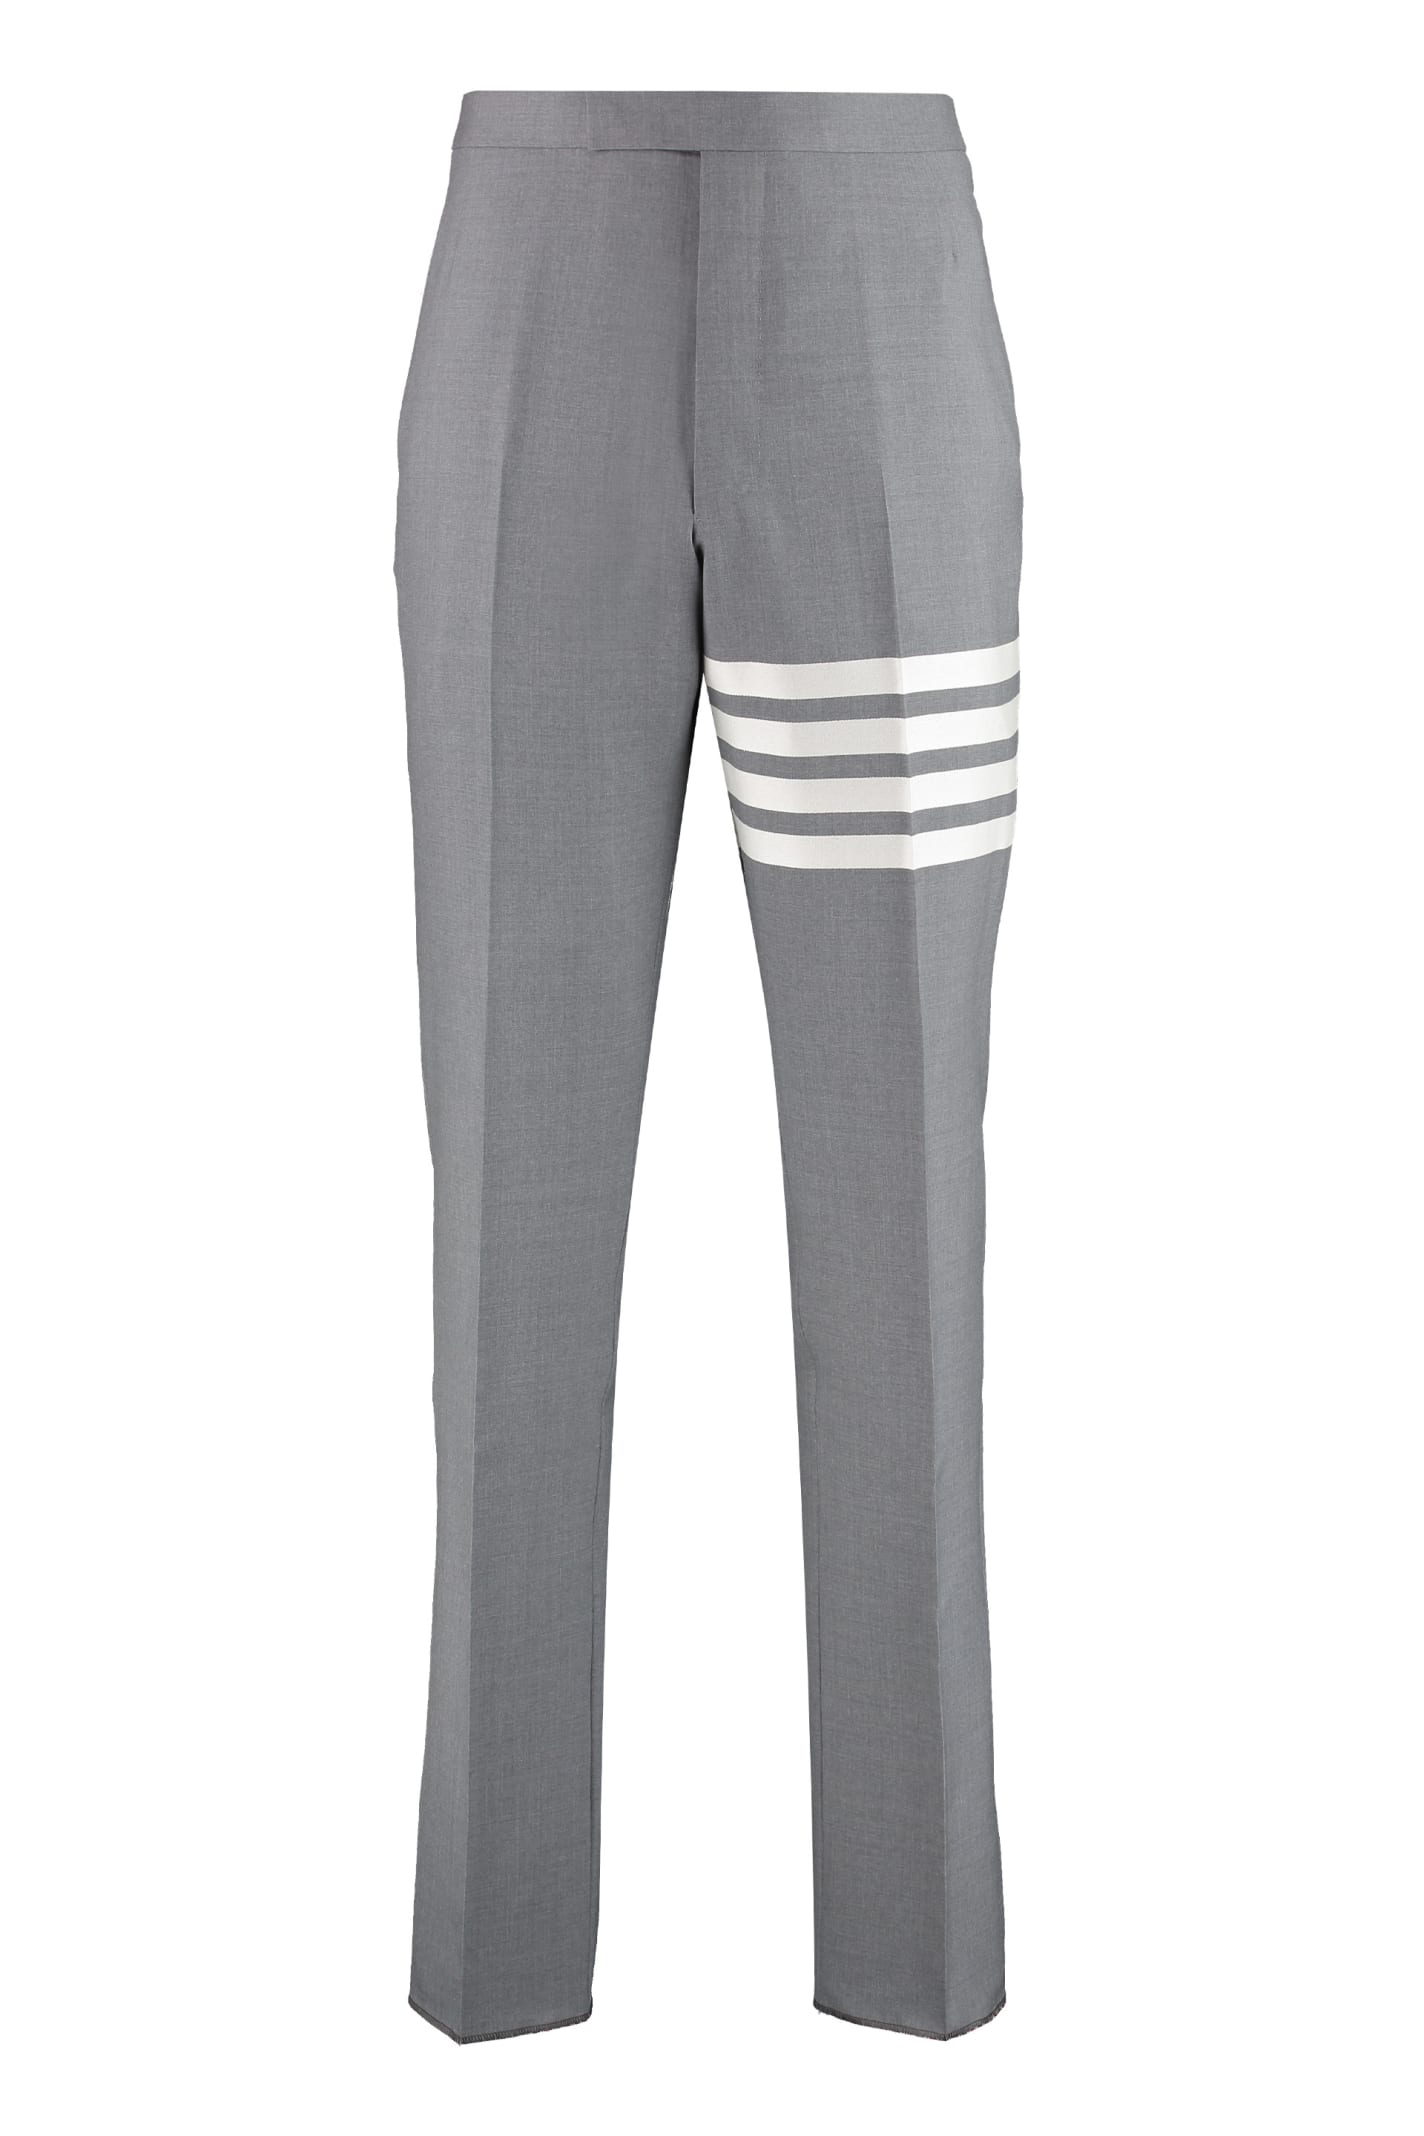 Thom Browne Wool Tailored Trousers